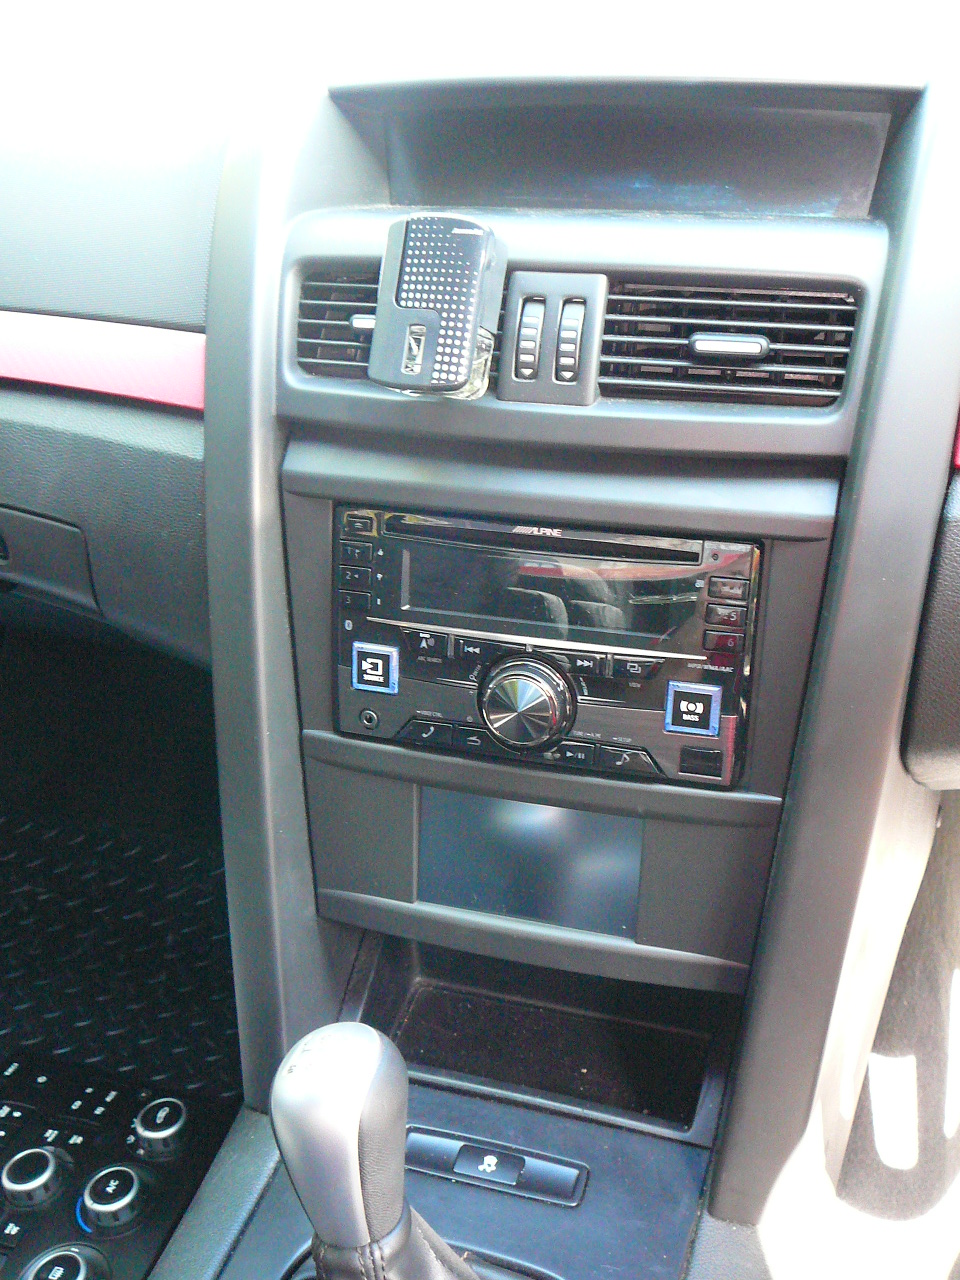 Holden Commodore VE, Alpine CDE-W265ABT & Alpine Dash Fascia with Touch Screen A/C Controls